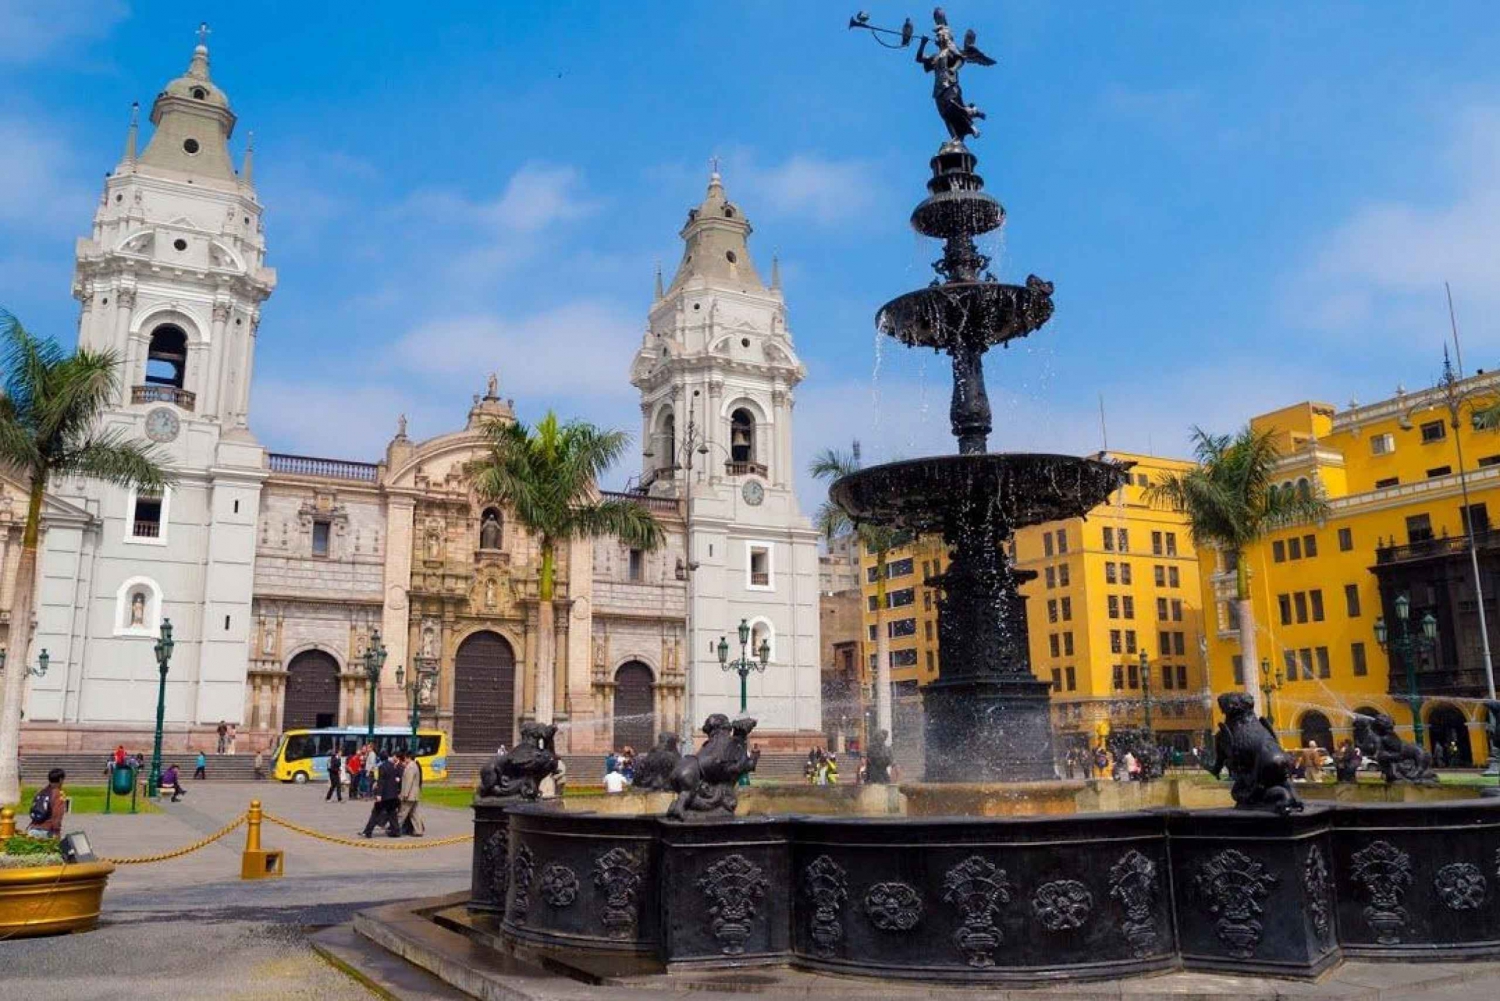 From Lima: City tour - City of the Kings